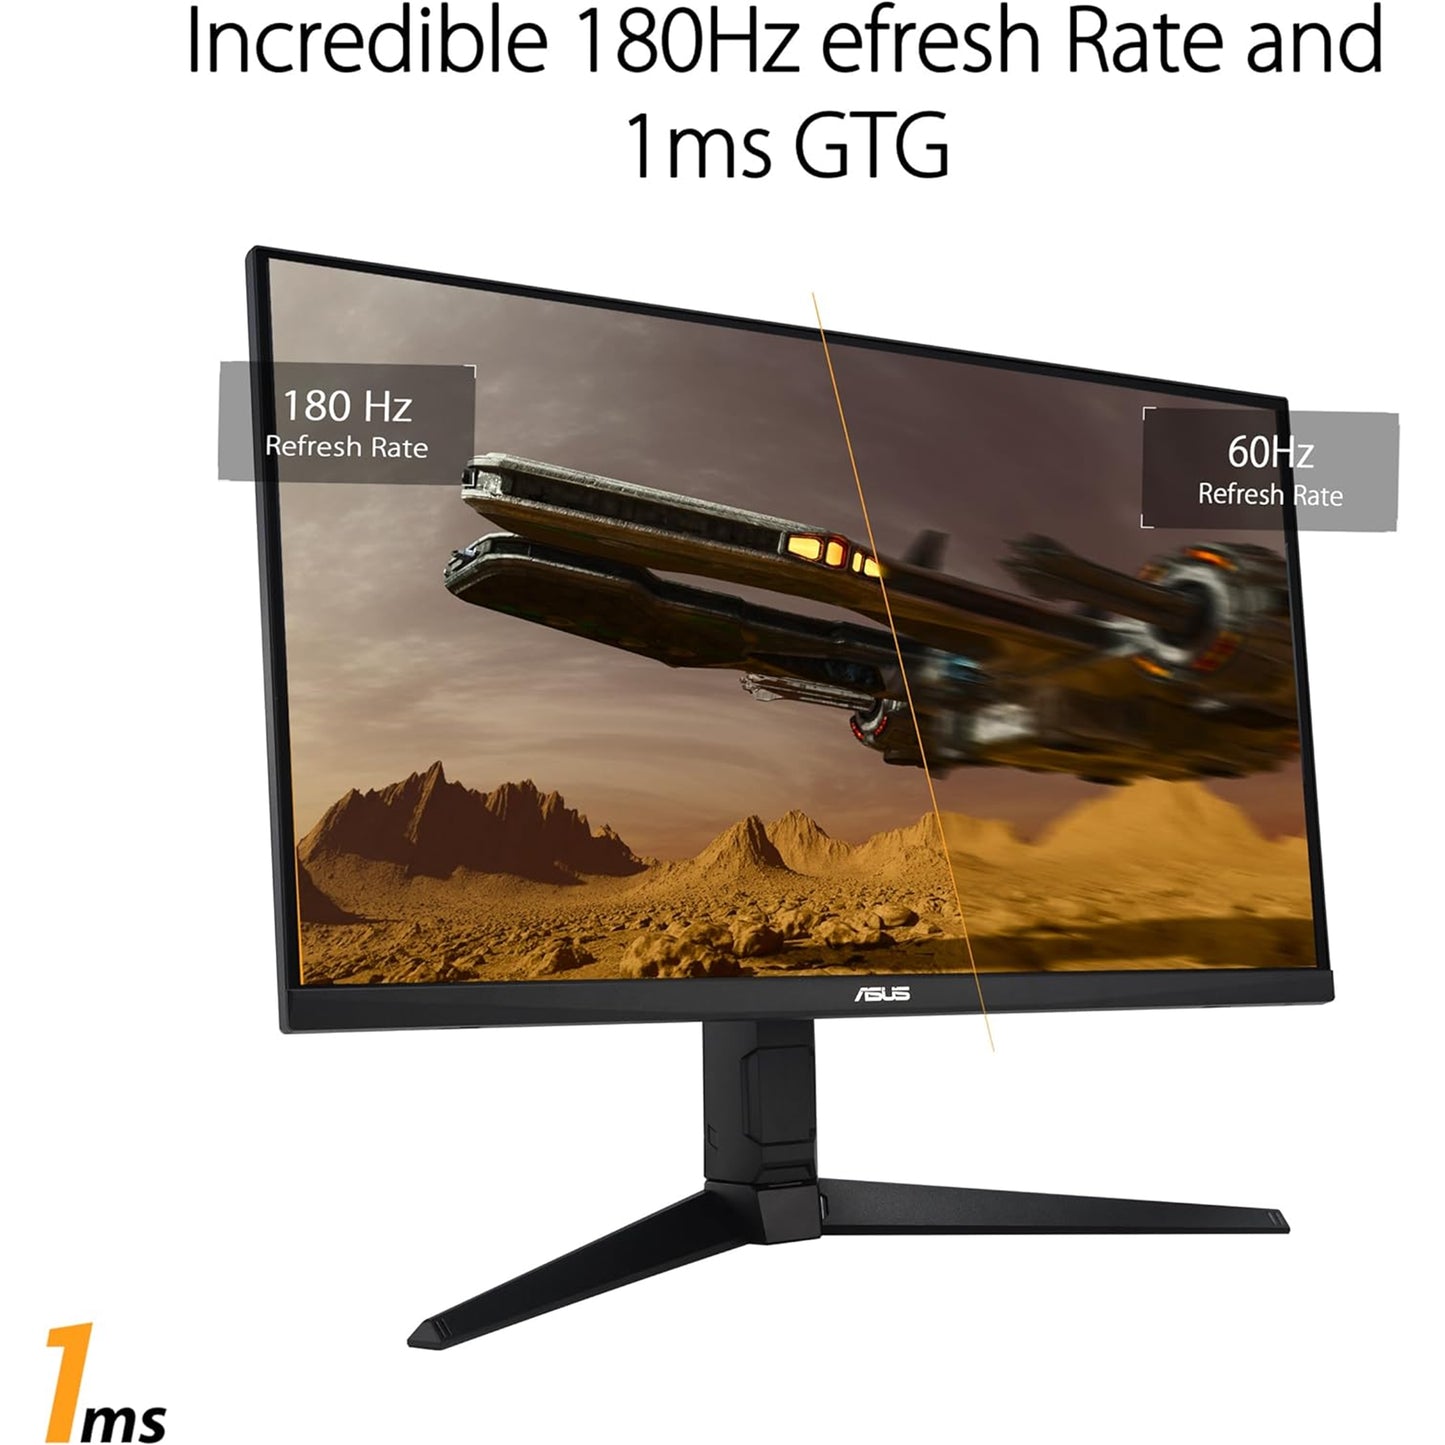 ASUS TUF Gaming 27” 1080P Monitor (VG279QL3A) - Full HD, 180Hz, 1ms, Fast IPS, Extreme Low Motion Blur, FreeSync Premium, G-SYNC Compatible, Speakers, DisplayPort, Height Adjustable